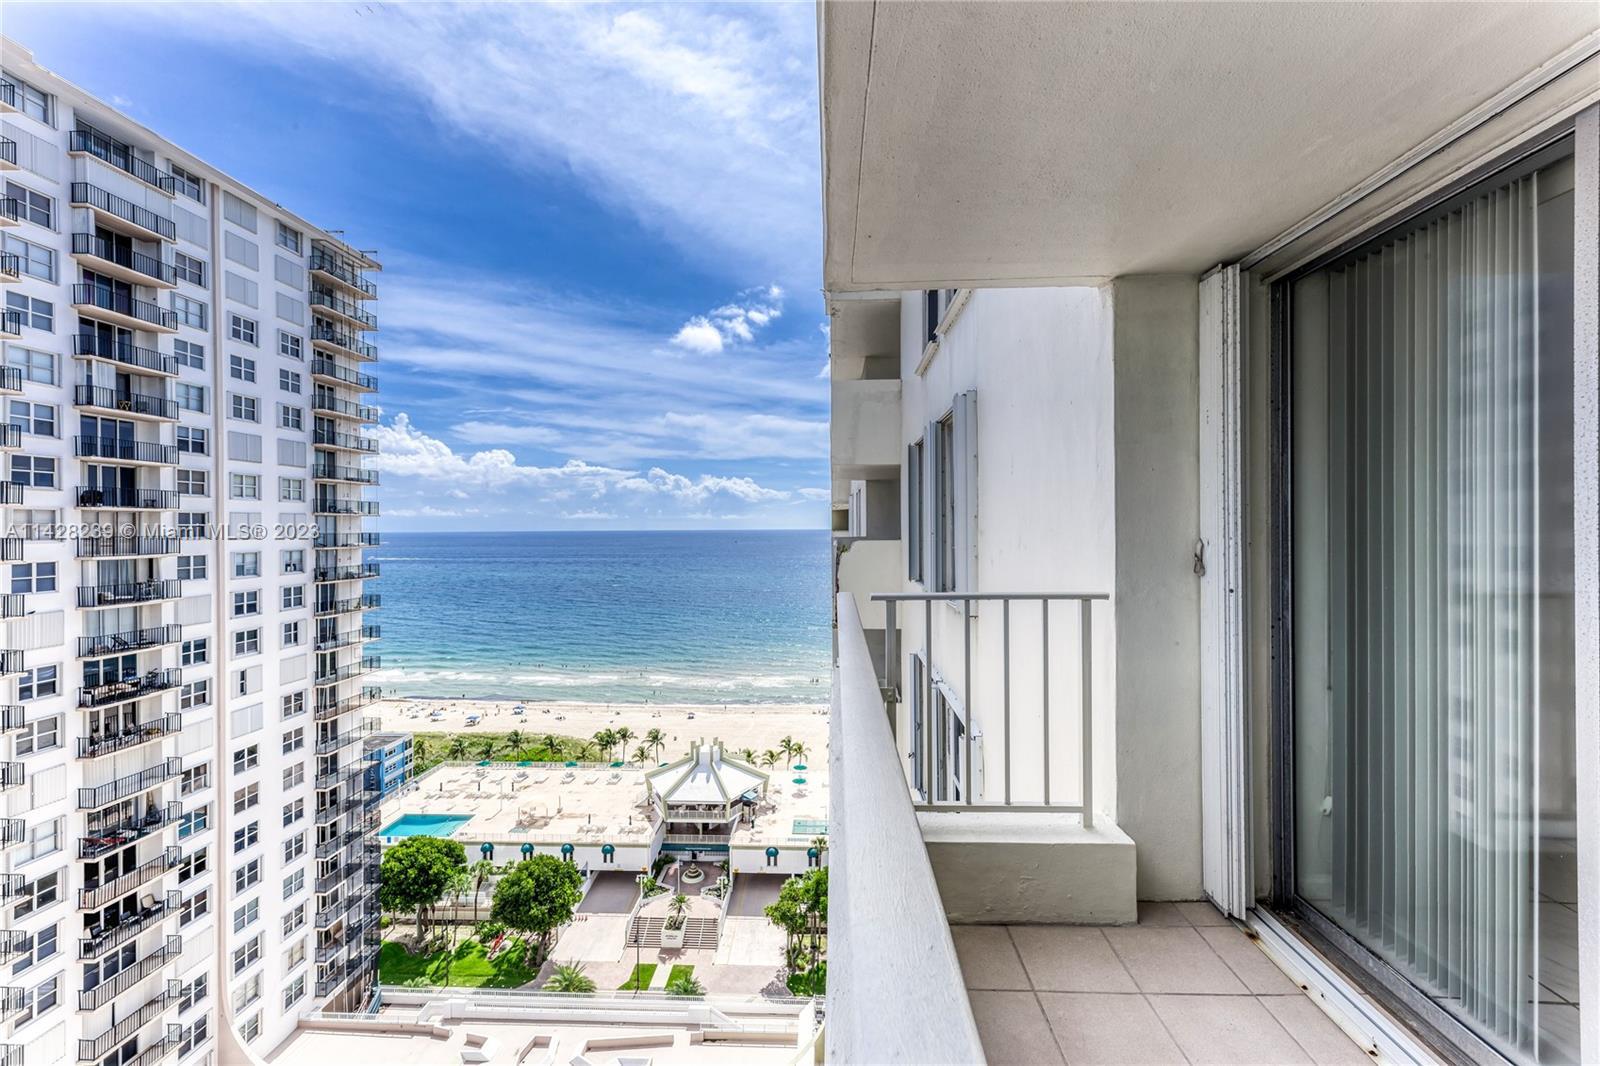 **GREAT FOR INVESTORS, RENT IMMEDIATELY!  Welcome to a luxurious oceanfront condo in desired Pompano